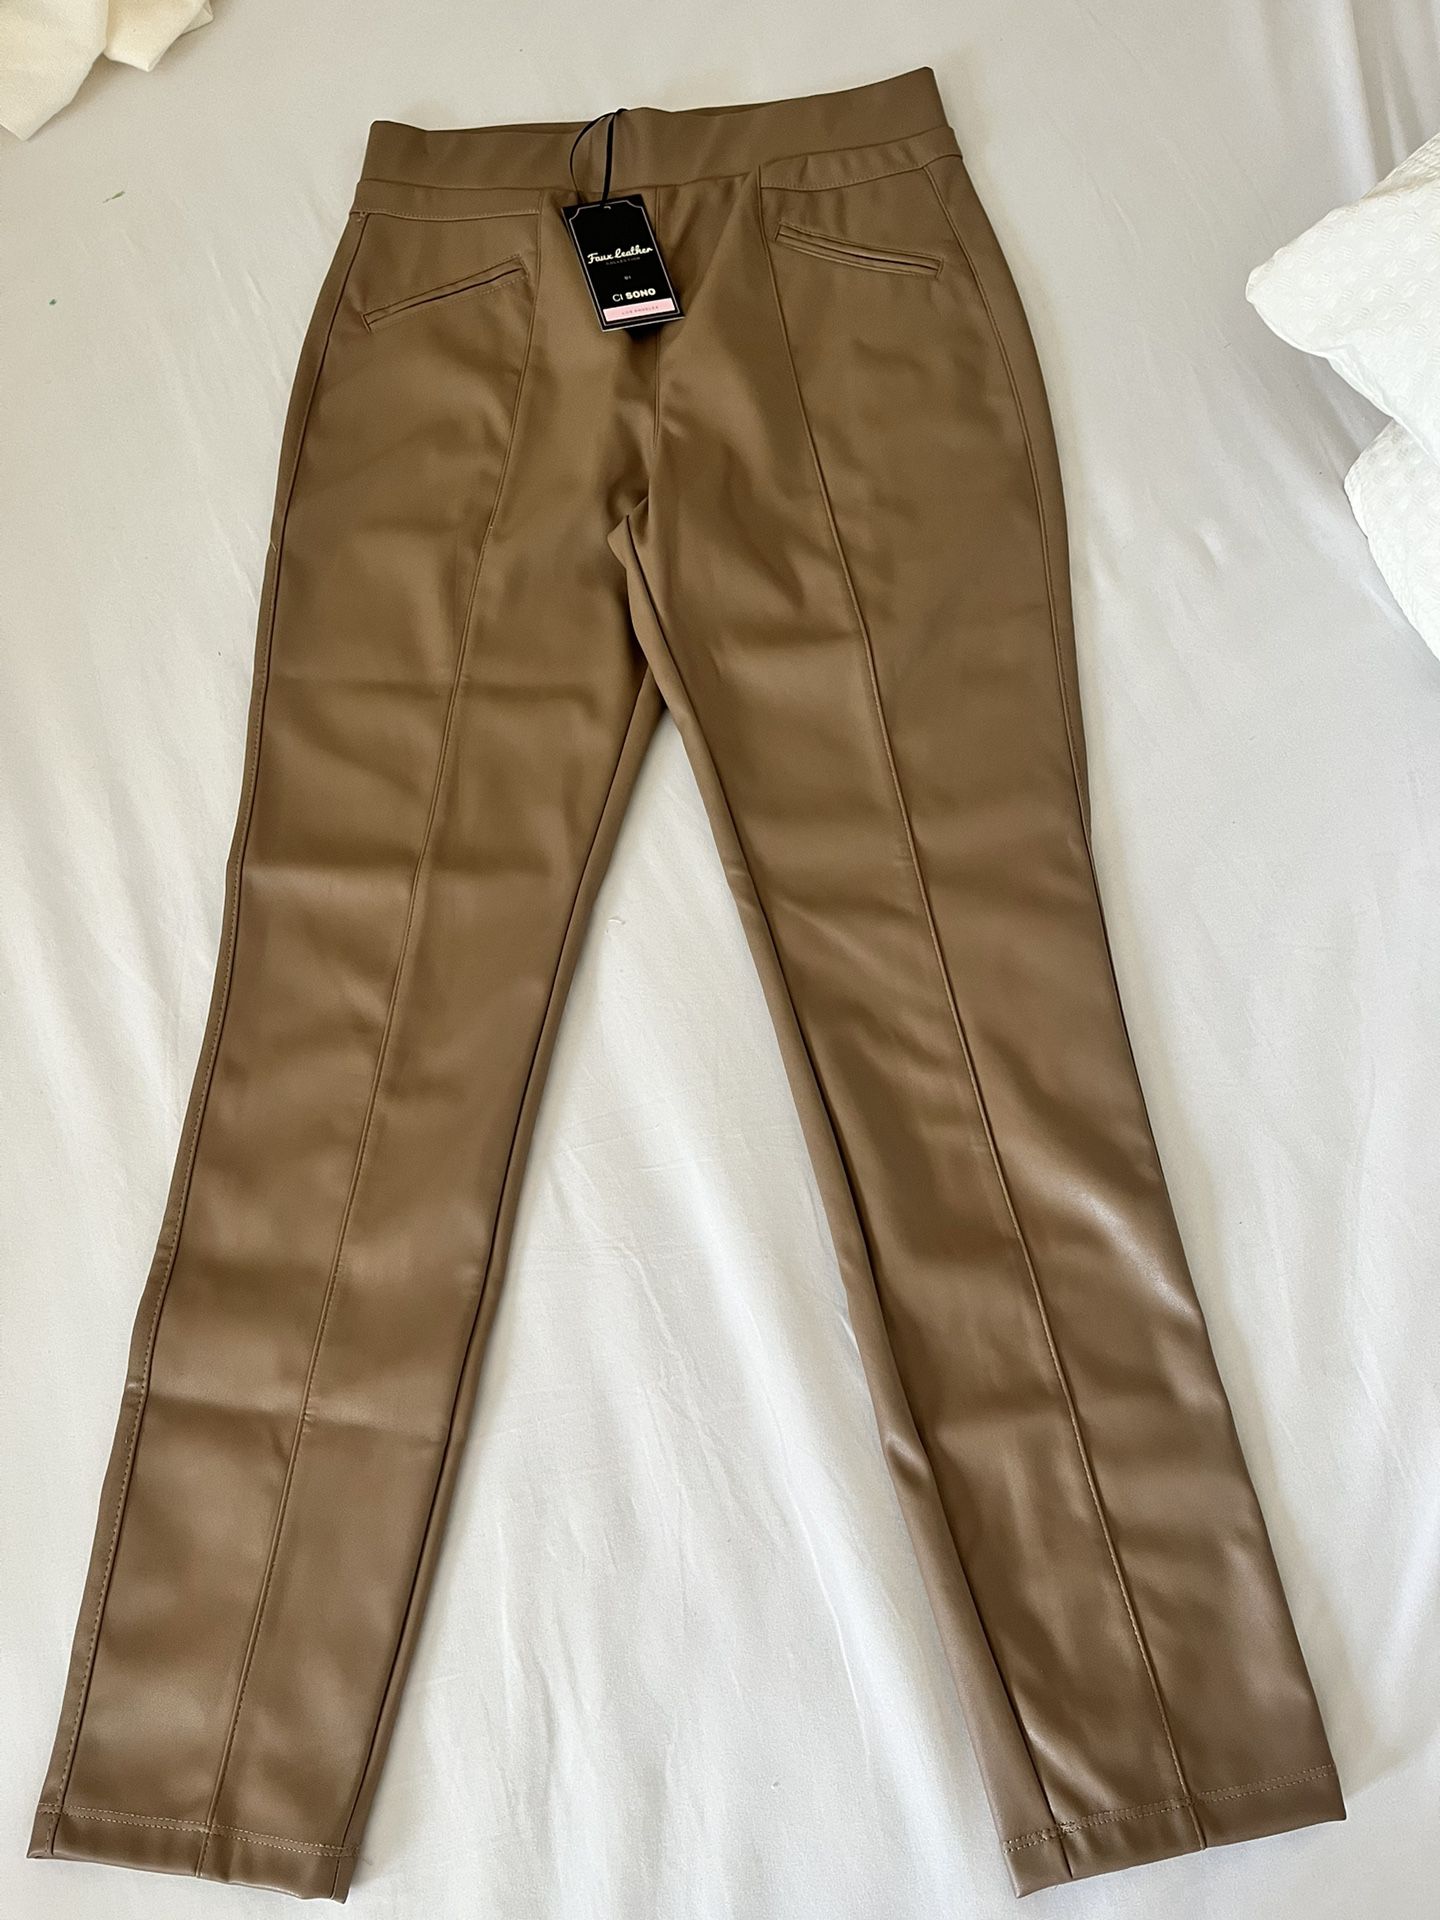 Brown Leather Pants $15 Firm